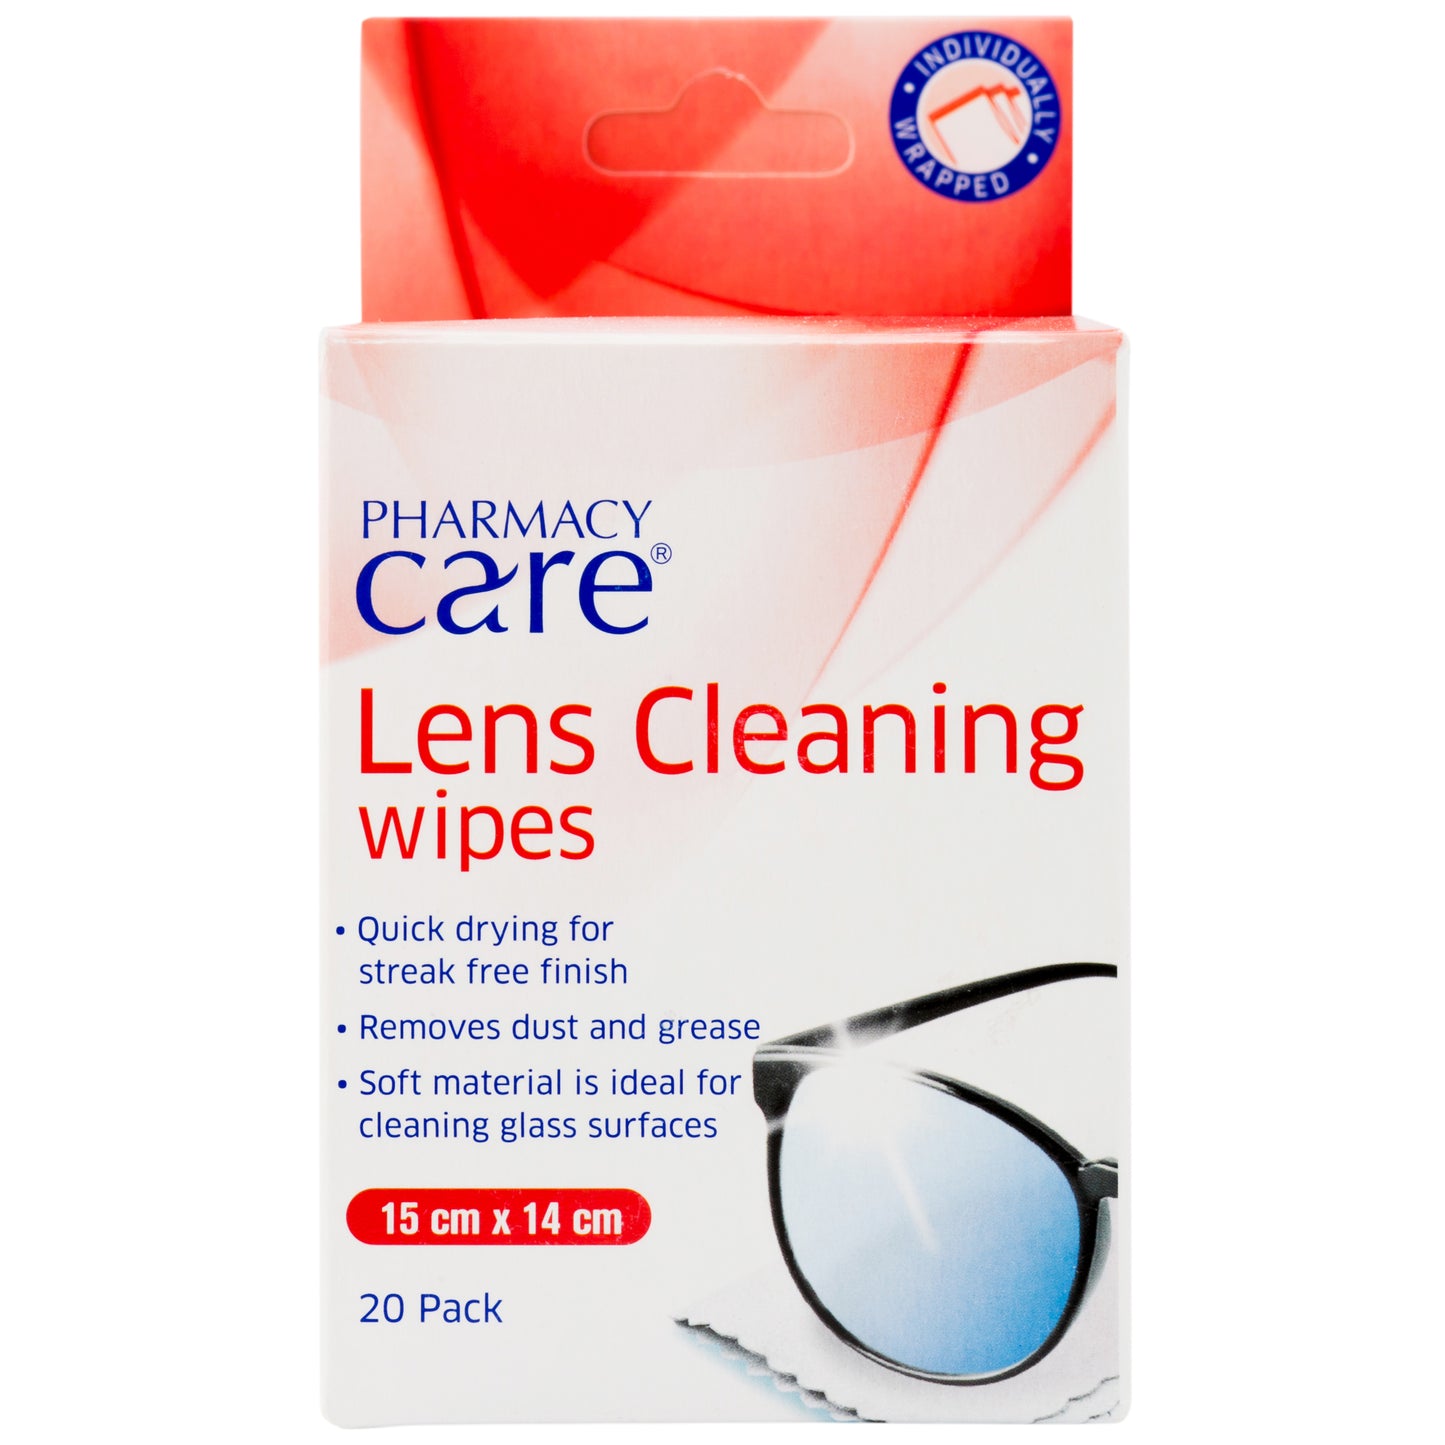 Pharmacy Care Lens Cleaning Wipes 20pk